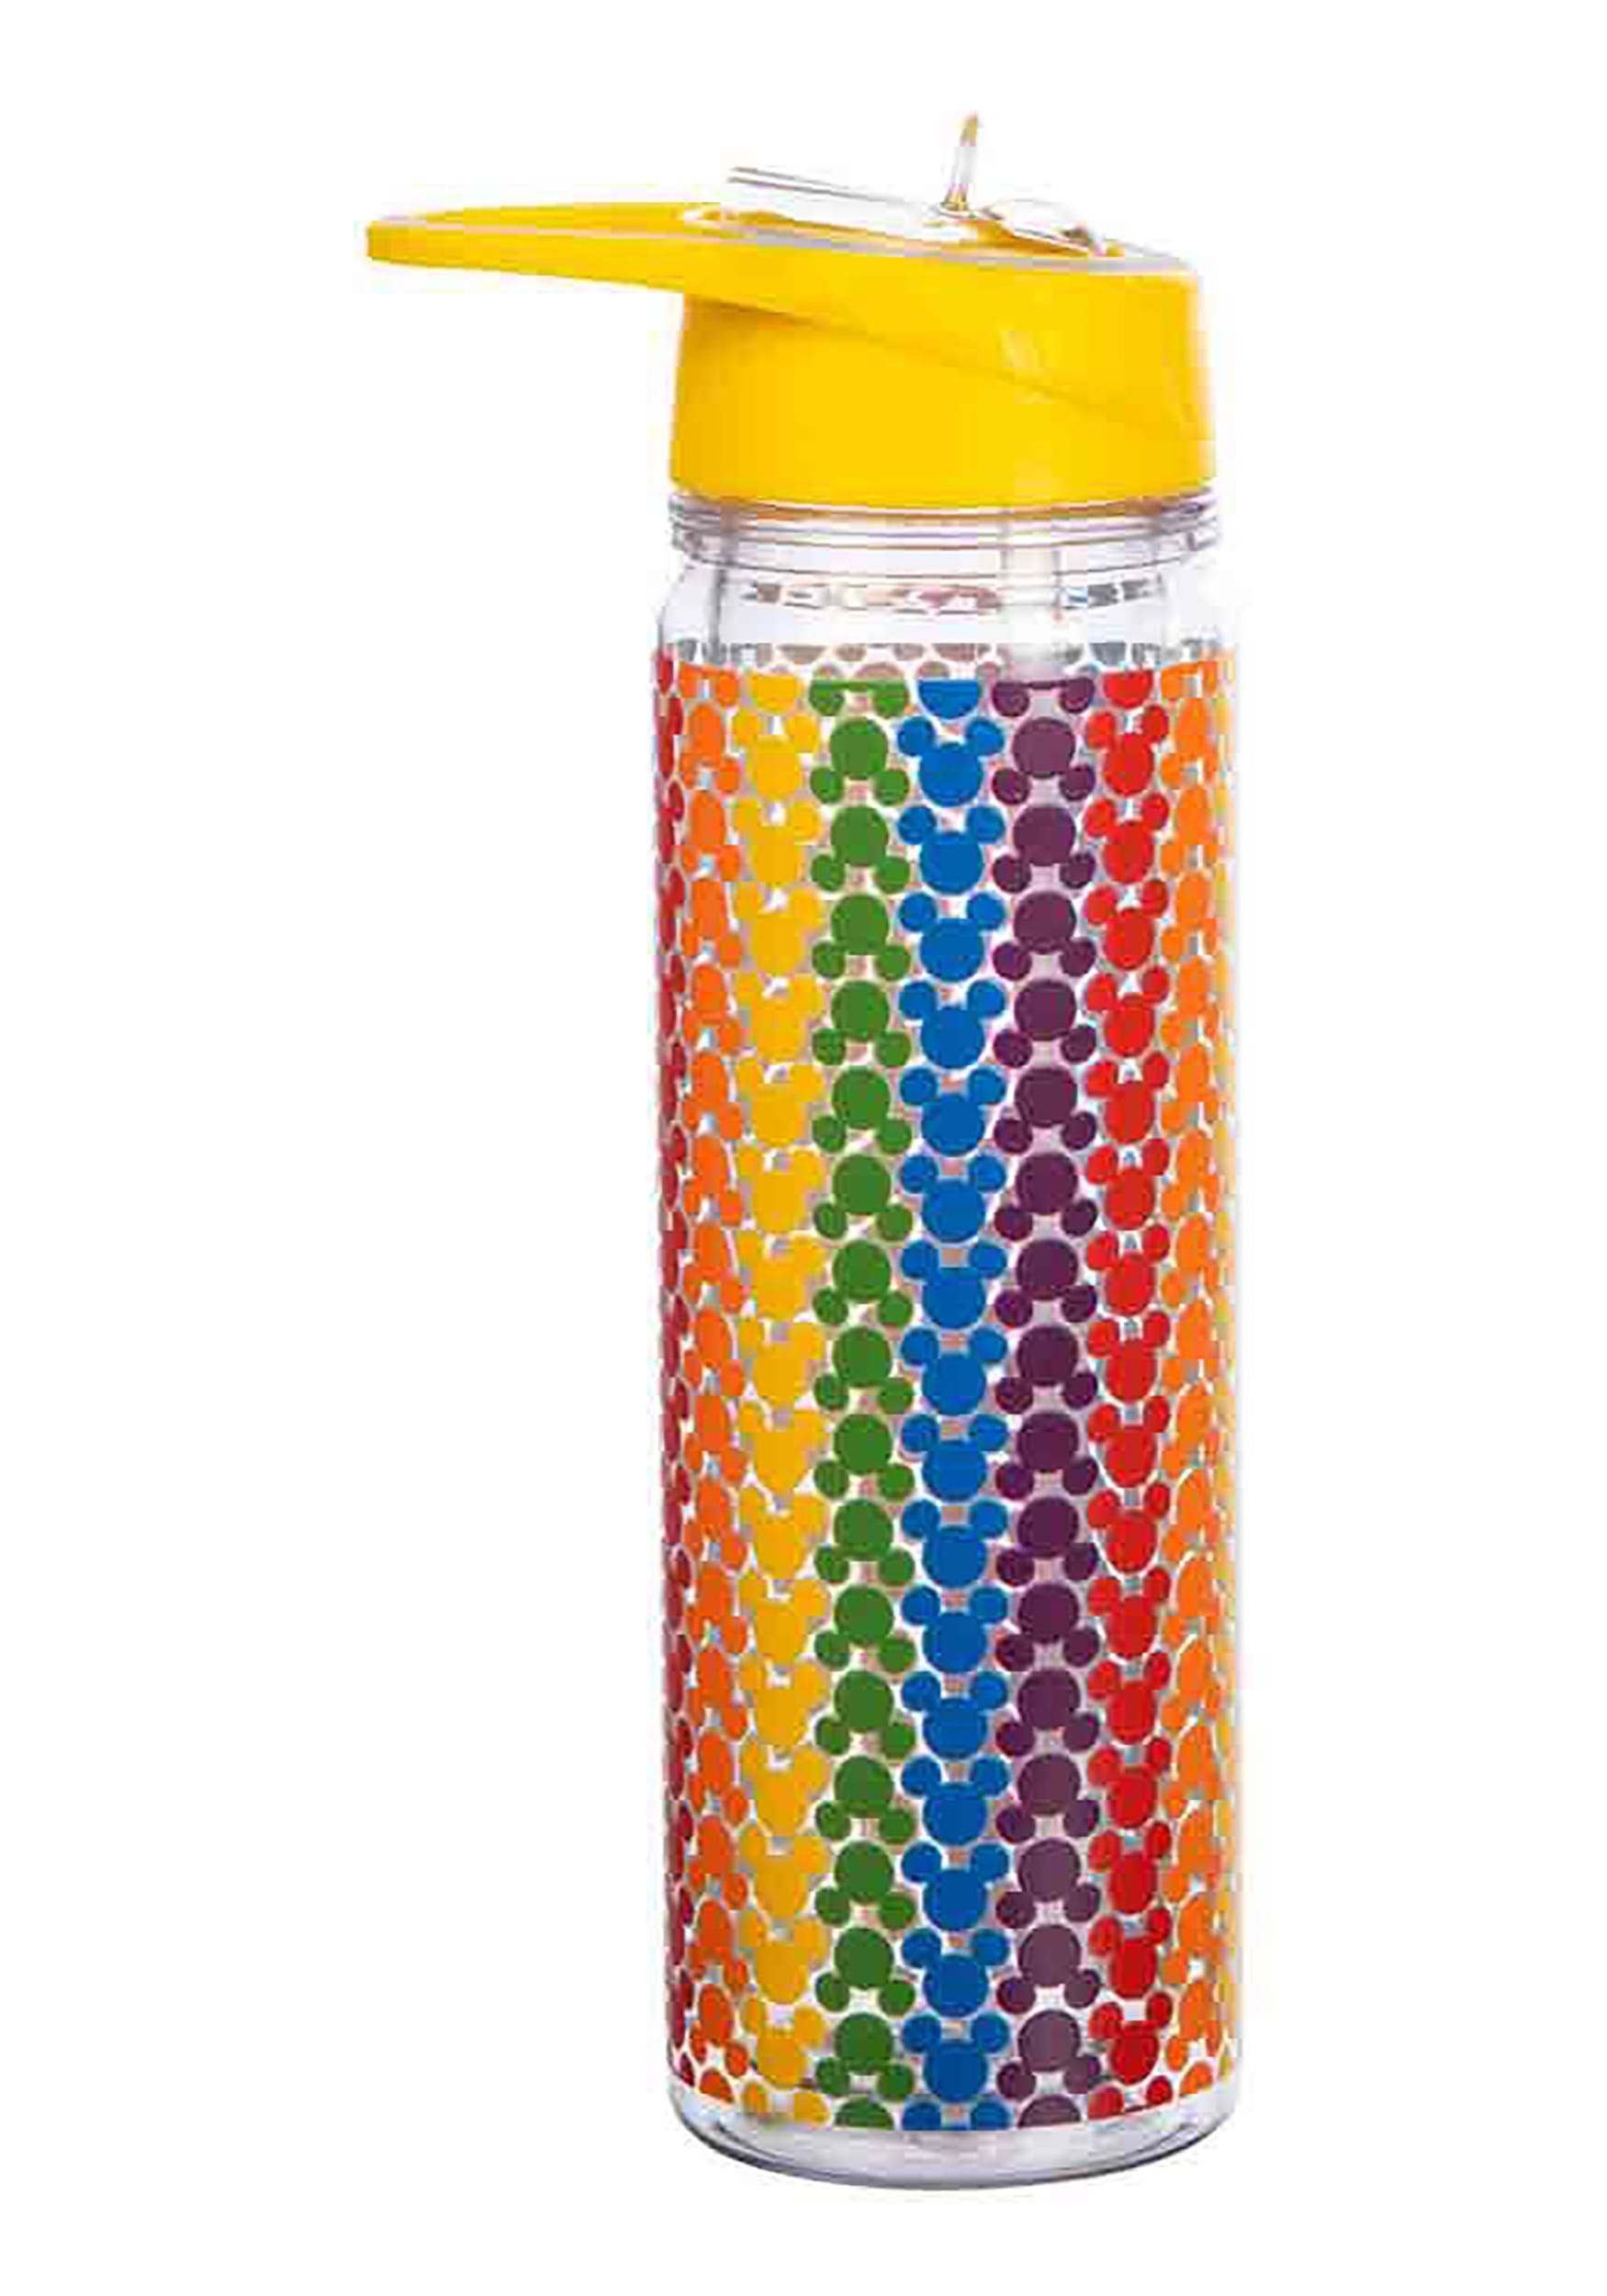 https://images.fun.com/products/79116/2-1-203806/disney-mickey-mouse-pride-rainbow-double-wall-water-bottle-3.jpg